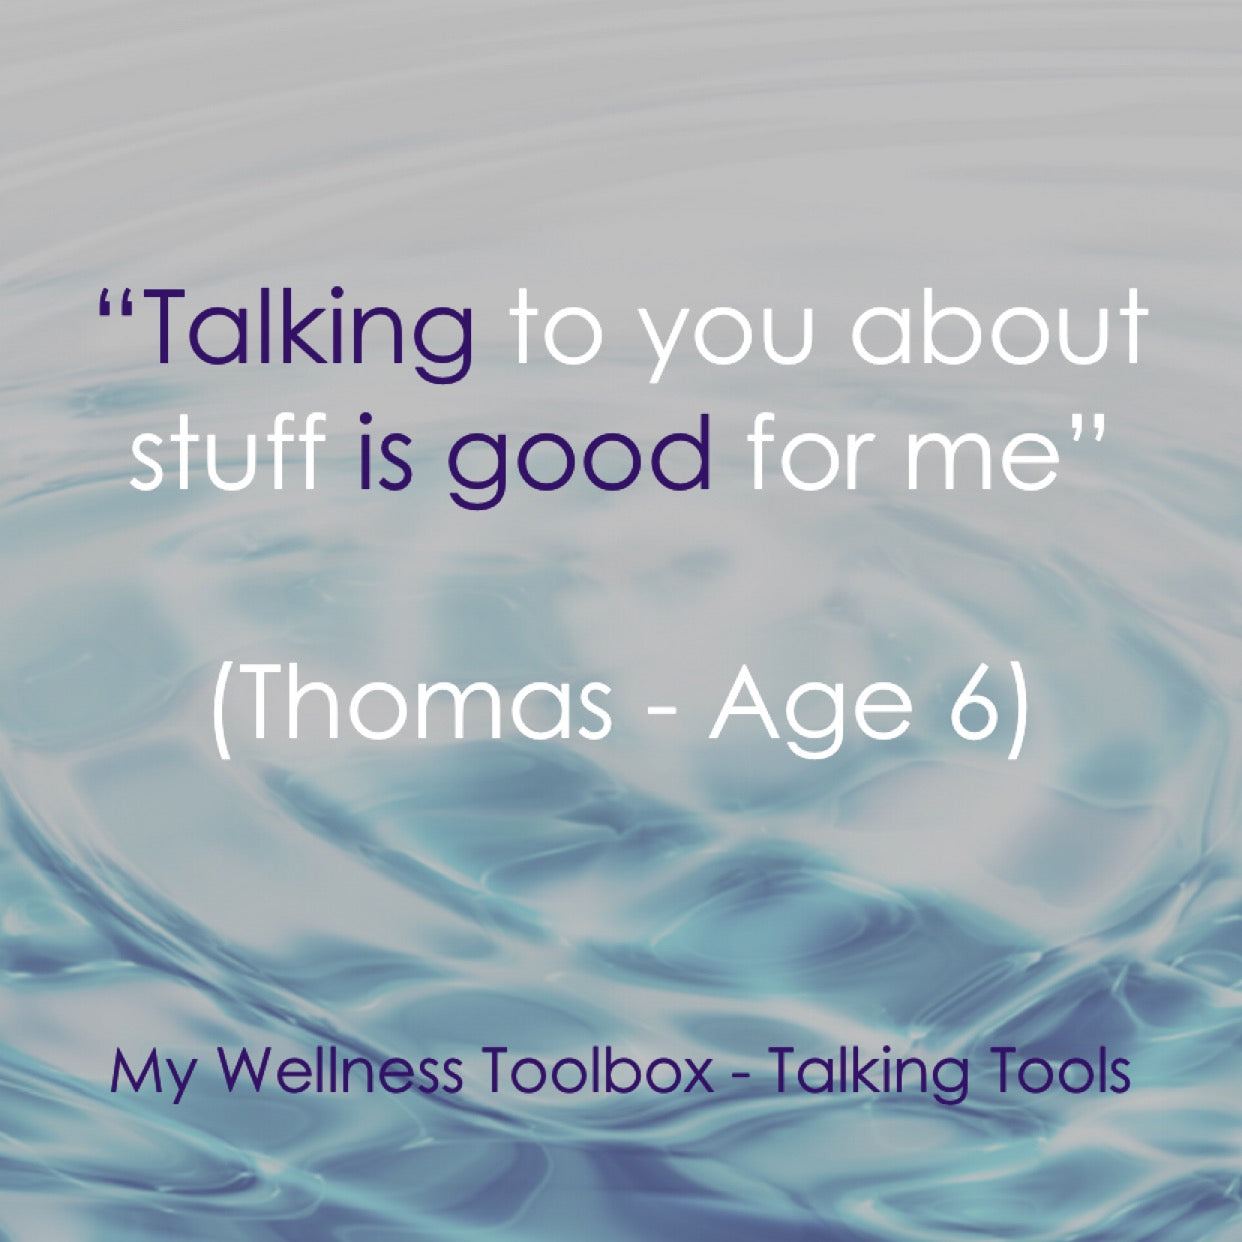 TOOL #27 TALKING: HOW OUR 6-YEAR-OLD HIGHLIGHTED THE IMPORTANCE OF TALKING